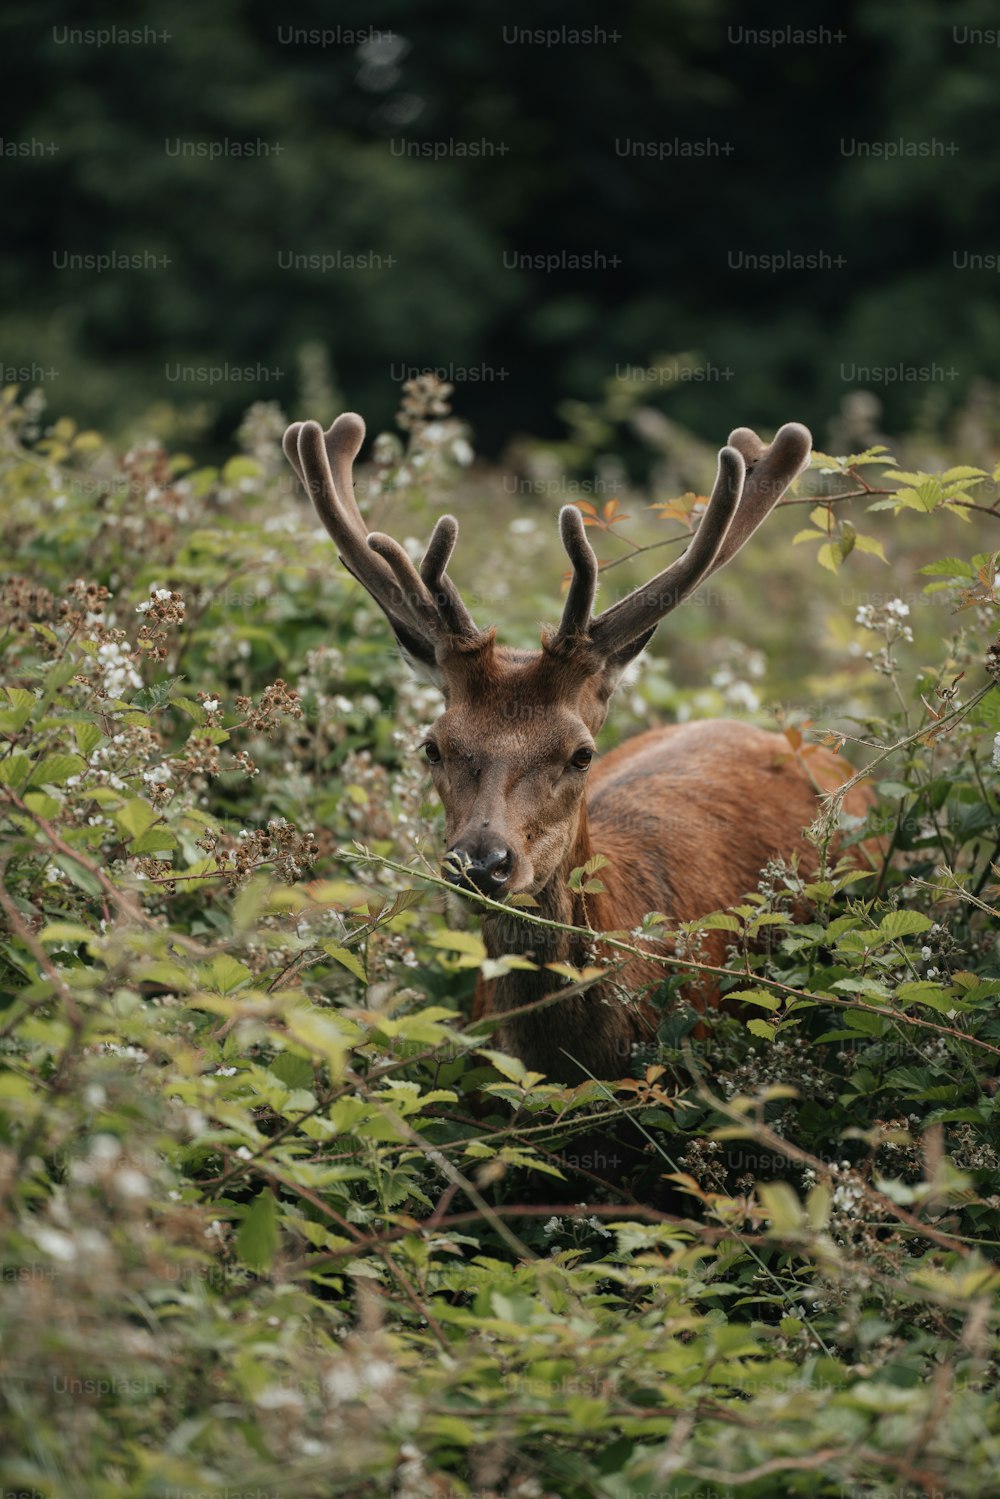 a deer with antlers standing in a field of tall grass